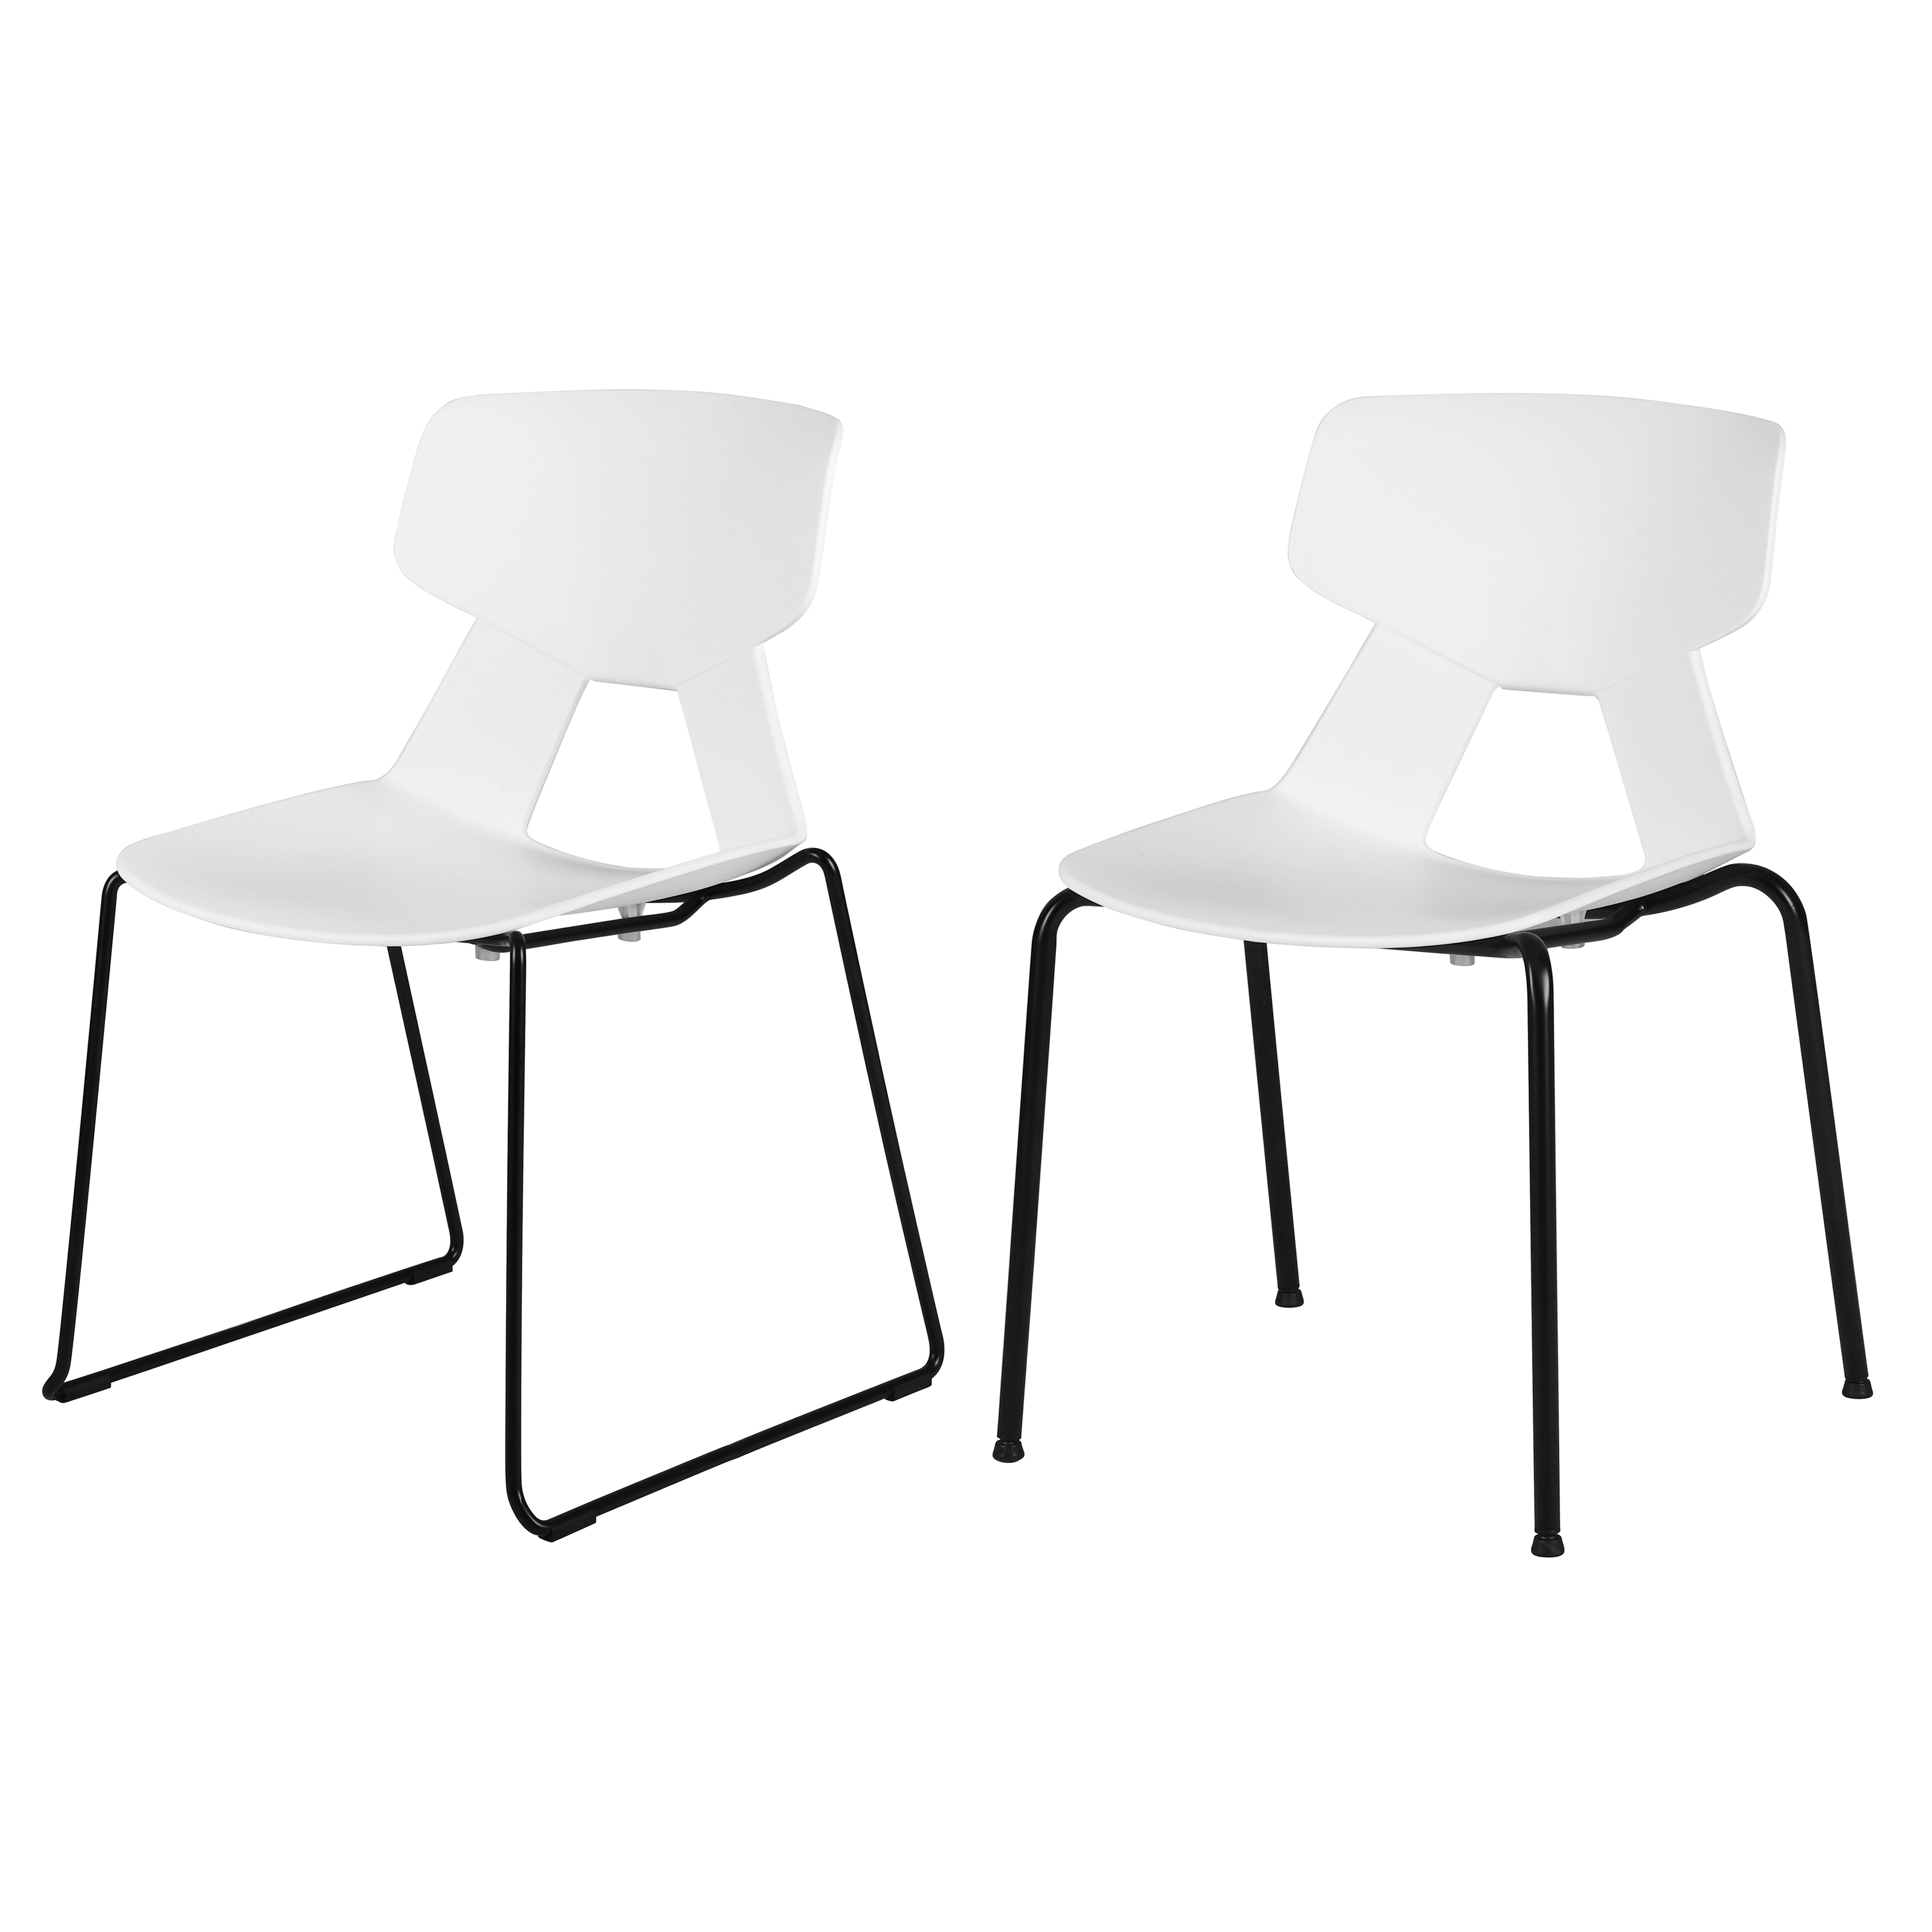 Elet - Dining Chair